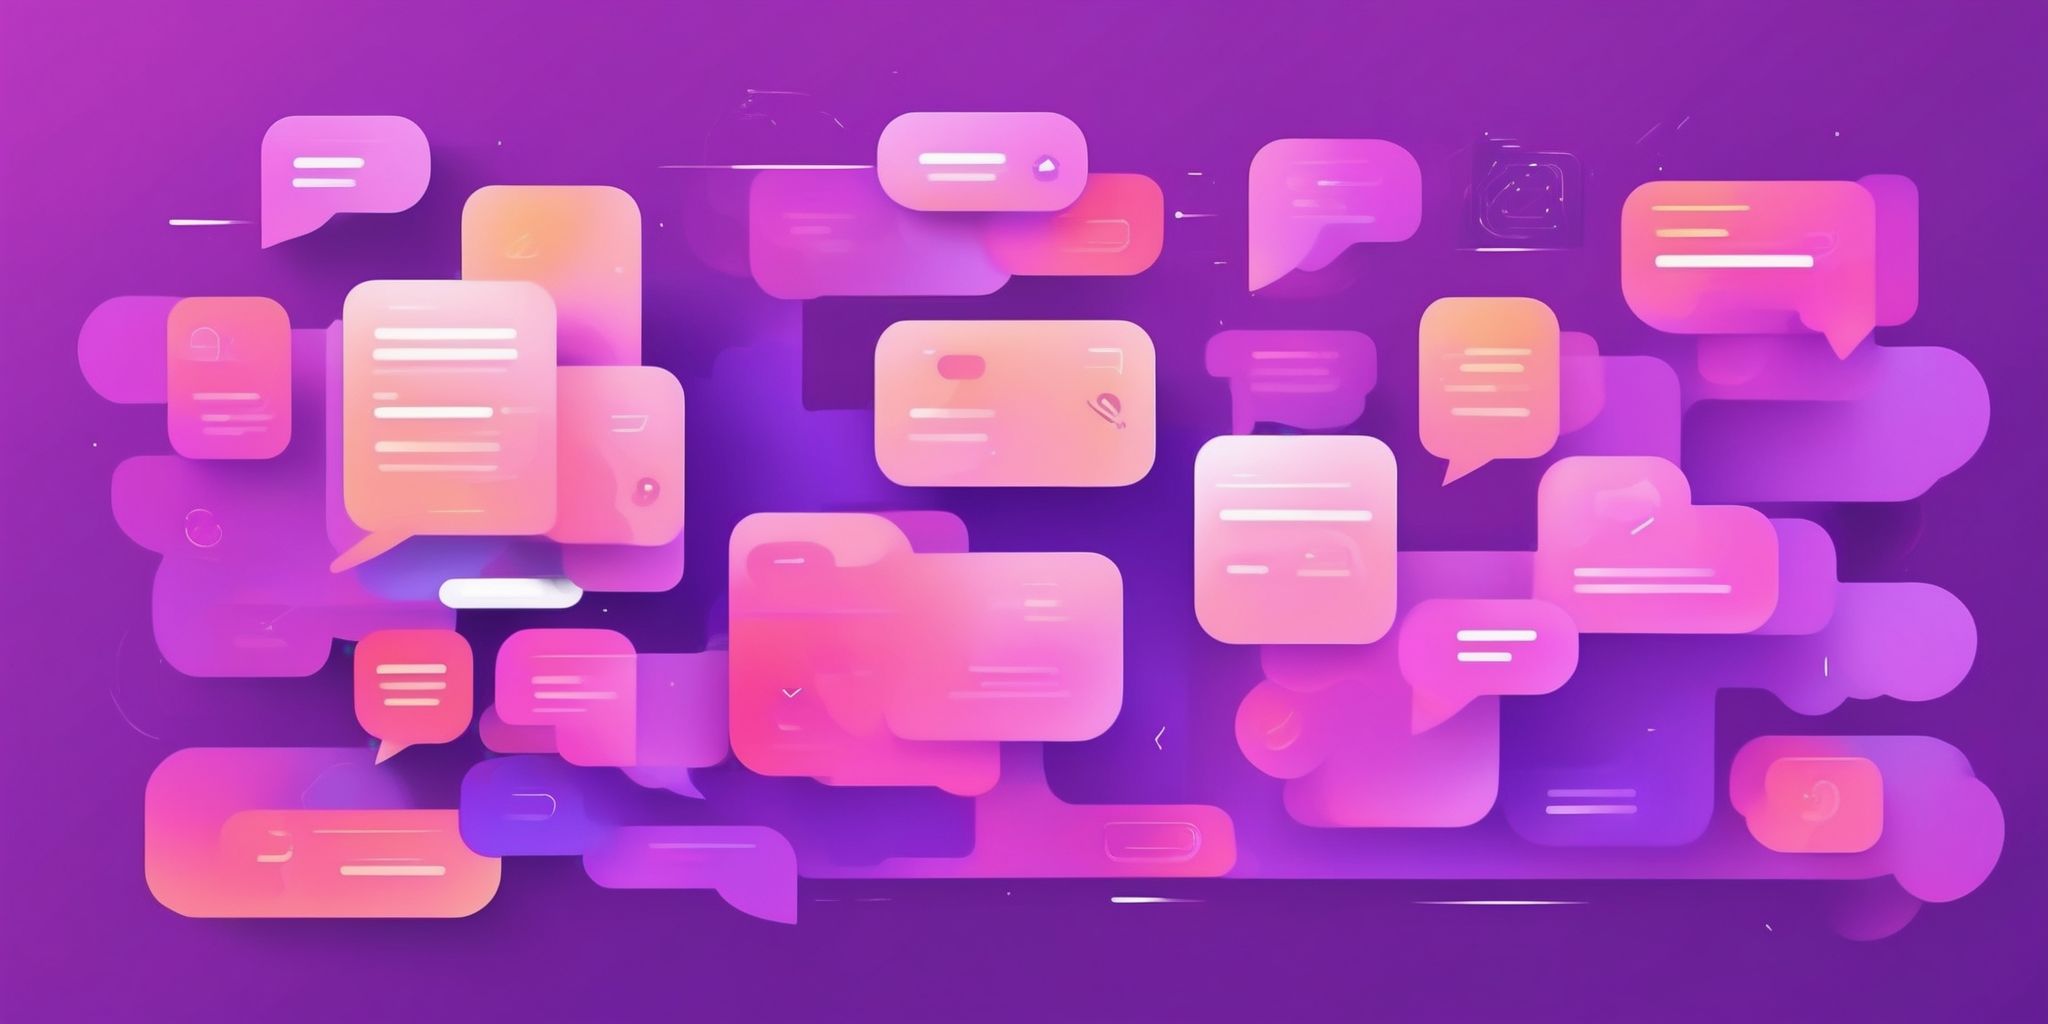 Text conversation in flat illustration style, colorful purple gradient colors